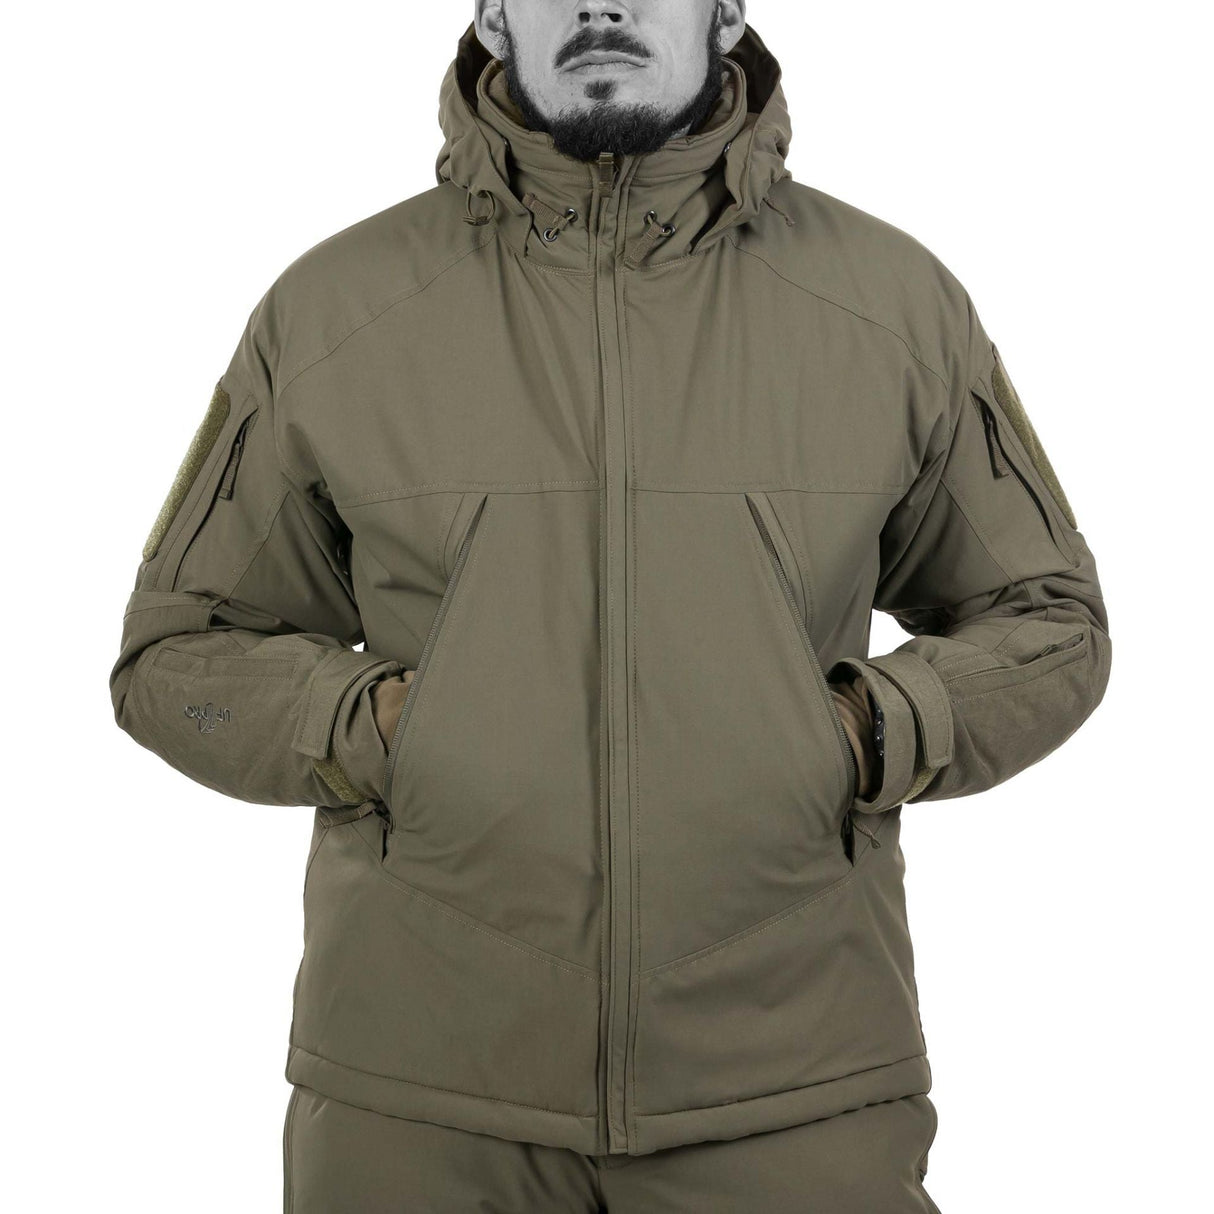 100% Windproof and Water-Repellent: Shields you from icy winds and keeps you dry in harsh conditions.